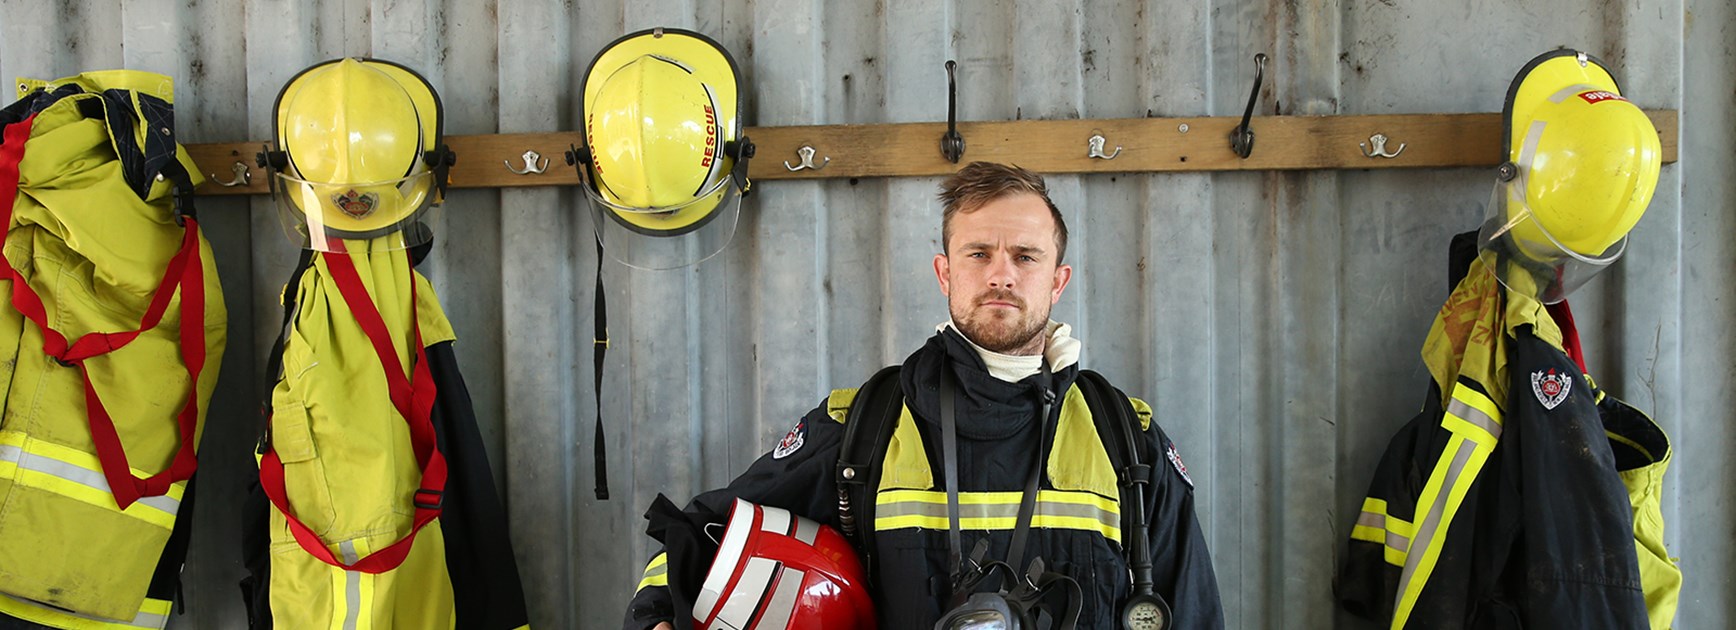 NRL Rookie contestant Chris Hyde during the fireman's challenge in Episode 7.